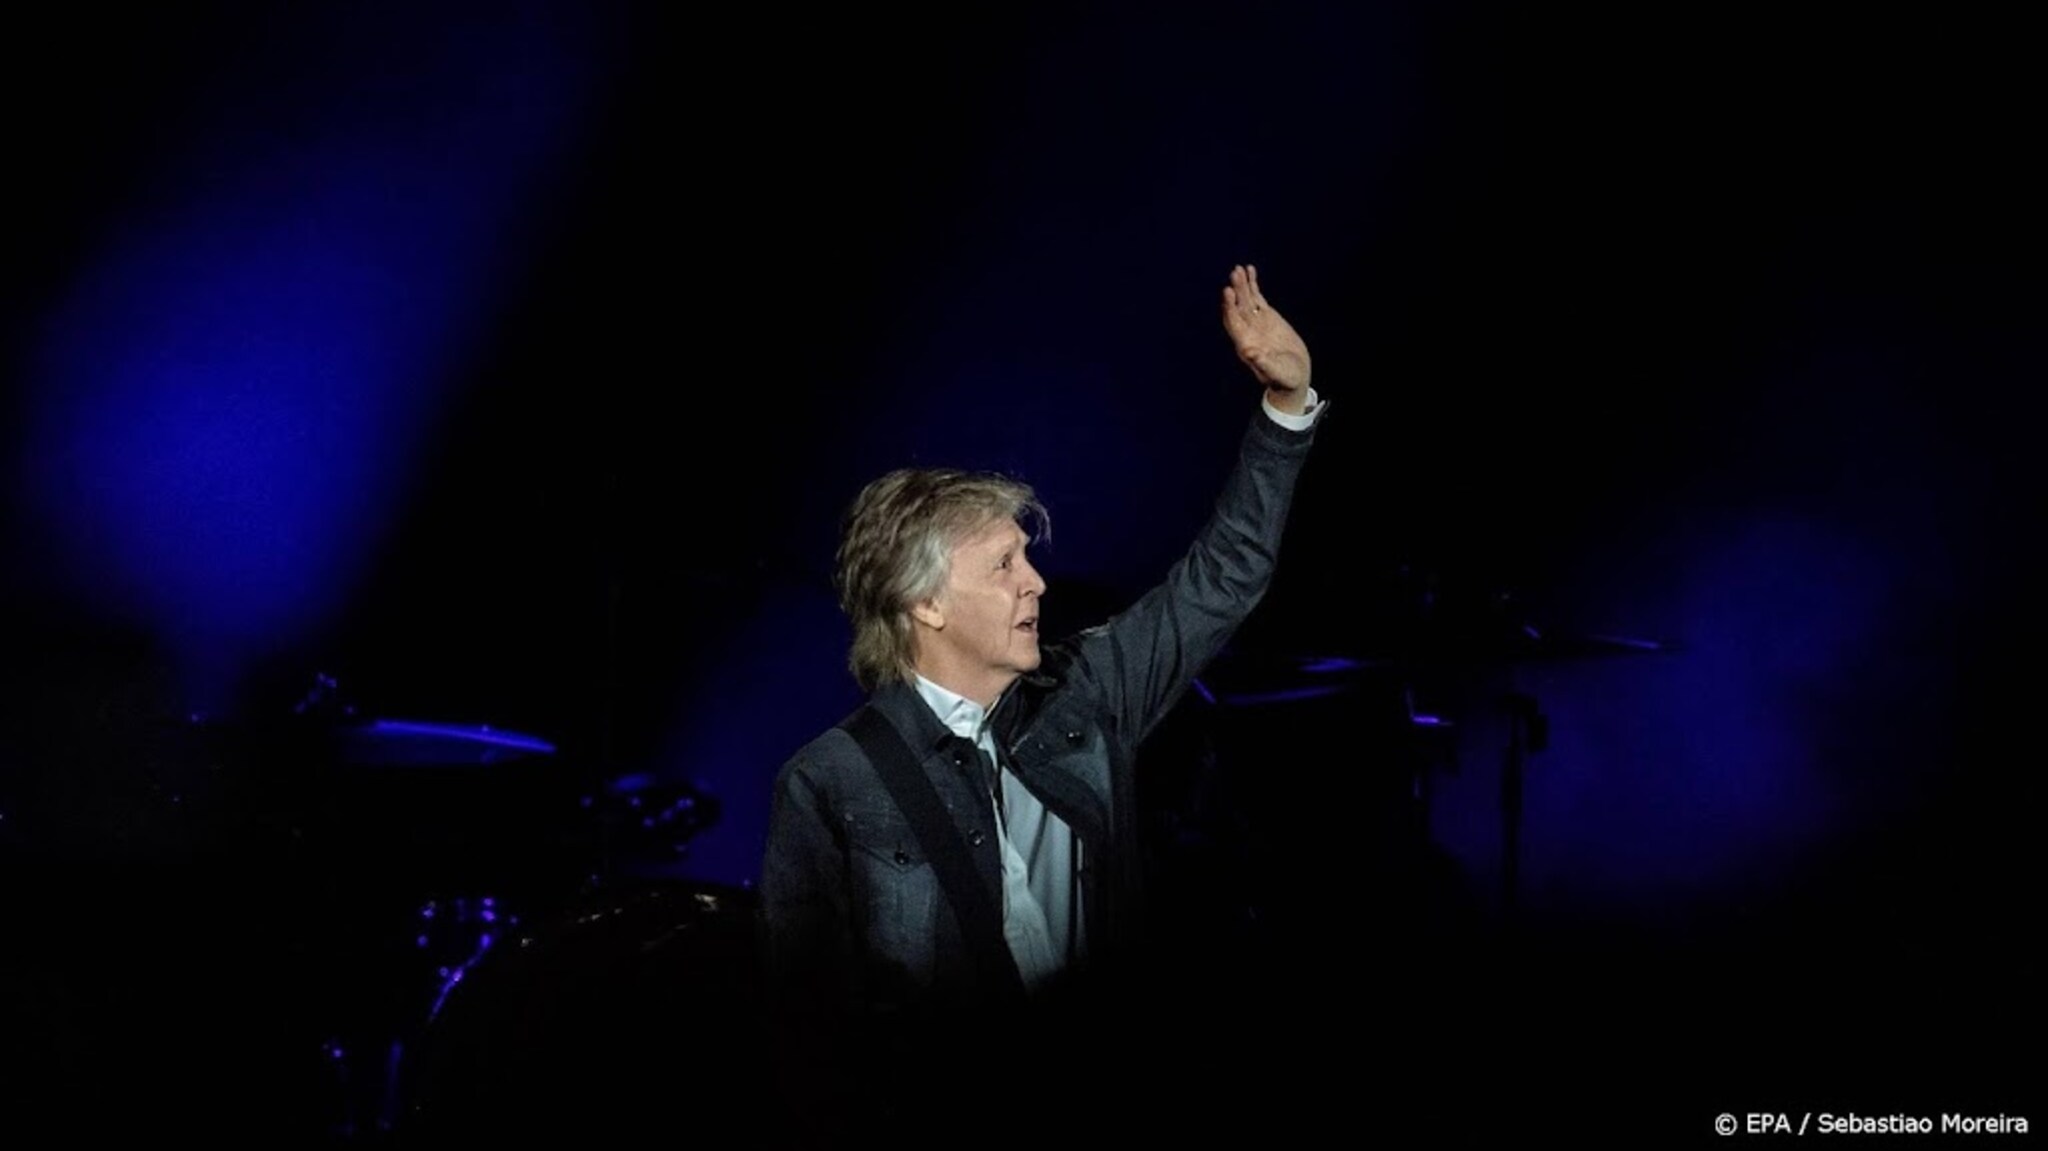 The James Bond producers didn't want to replace Paul McCartney at all